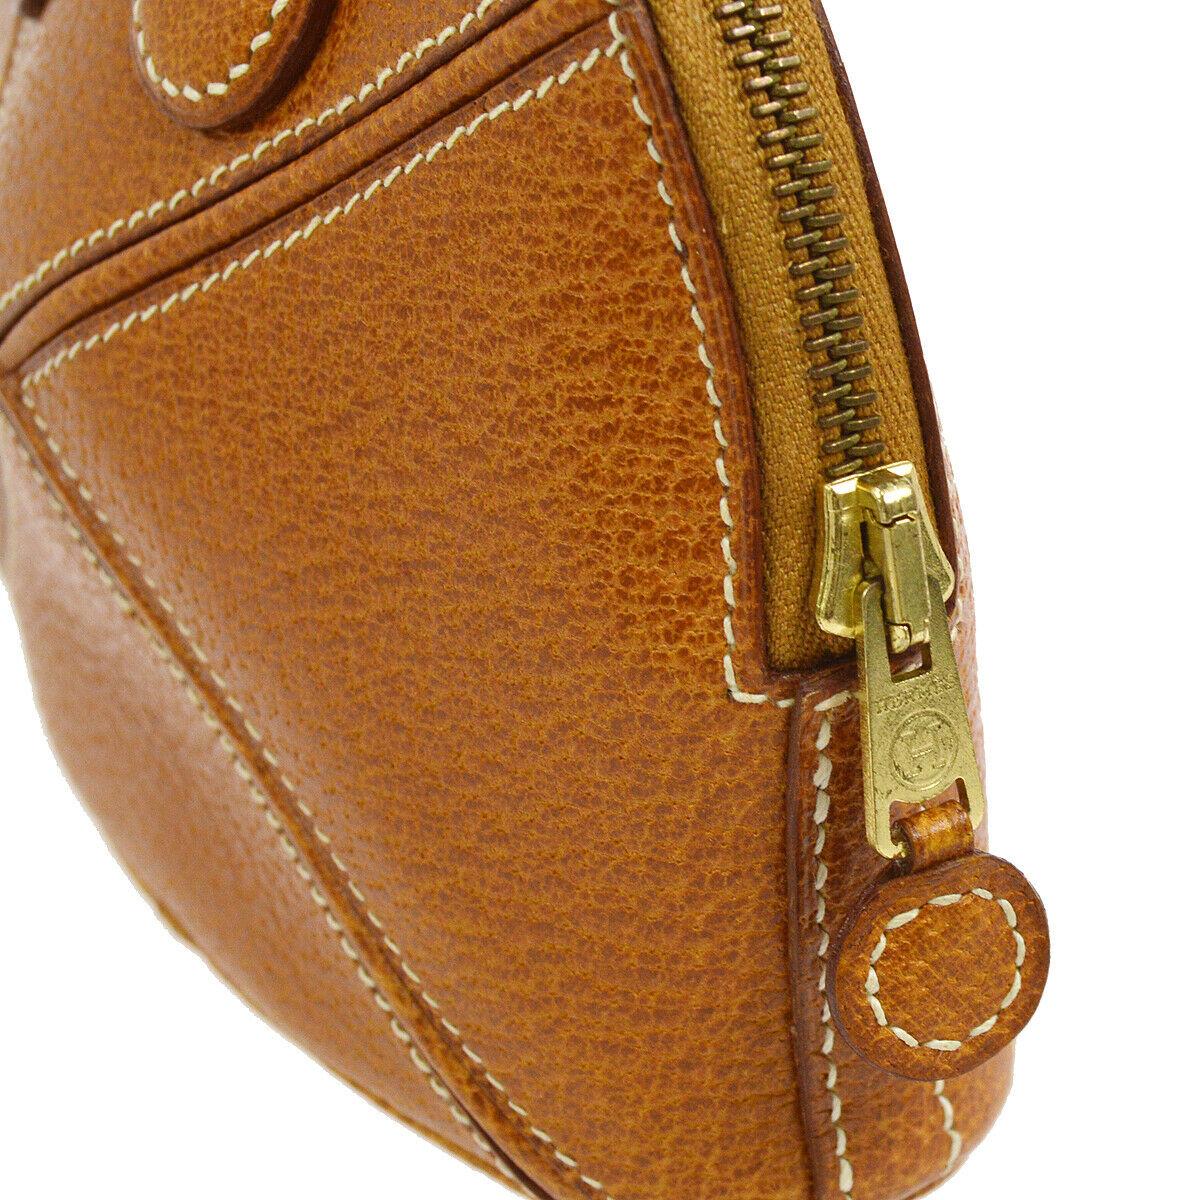 Hermes Leather Cognac Leather Gold Small Mini Party Top Handle Satchel Shoulder Bag in Box

Leather
Gold tone hardware
Zipper closure
Leather lining
Date code present
Made in France
Handle drop 3